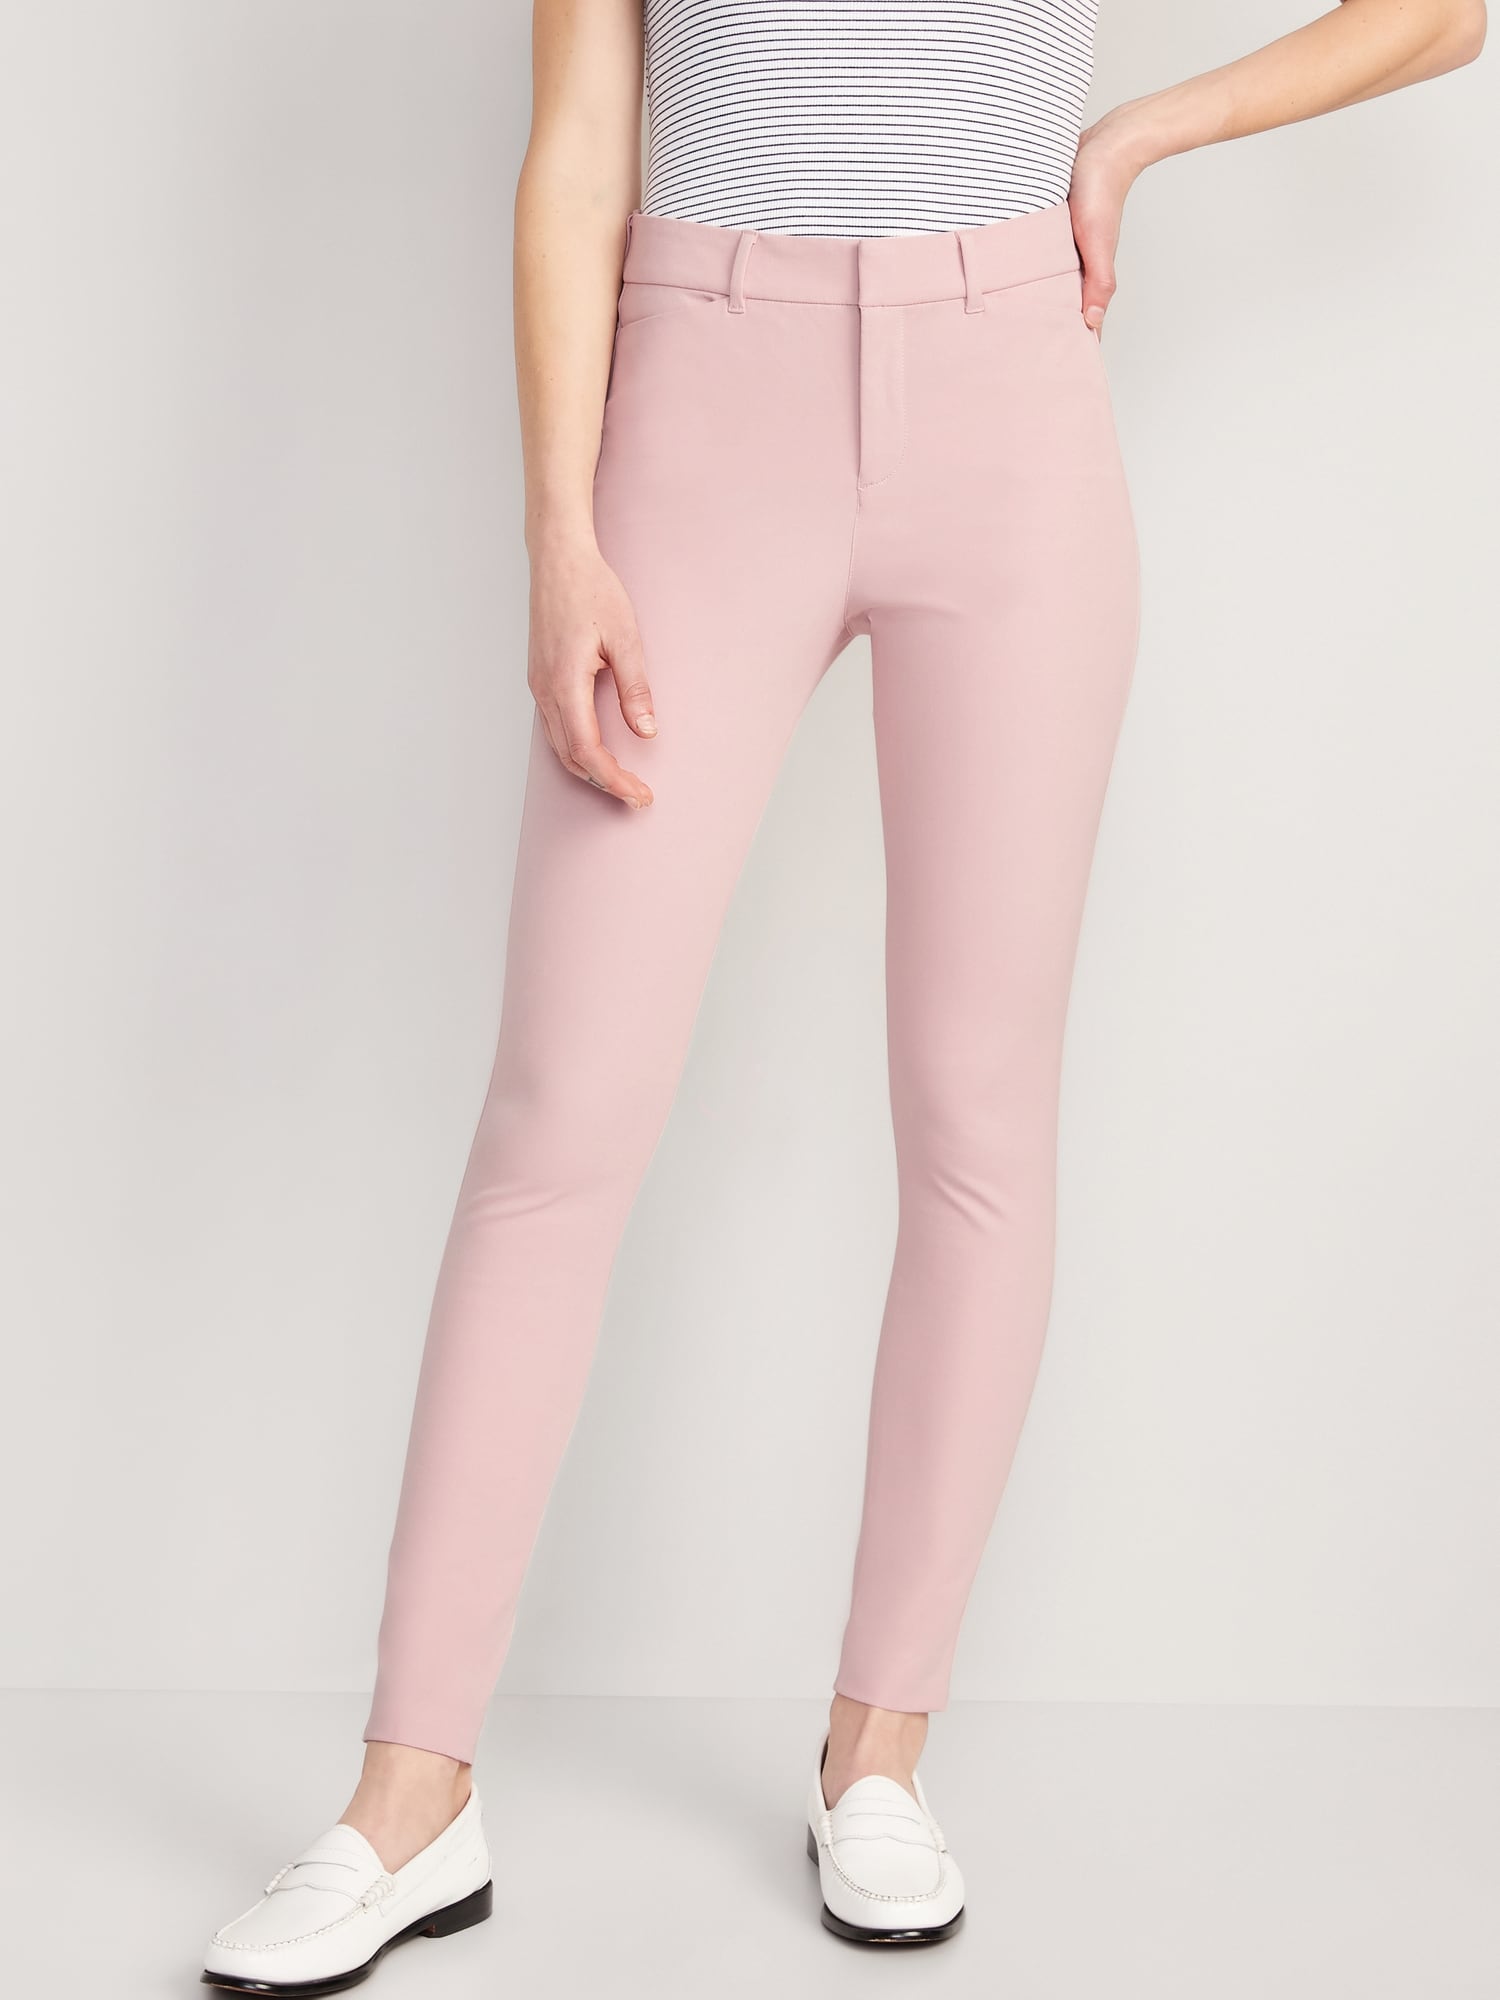 Old Navy High-Waisted Pixie Skinny Pants for Women pink - 629563322